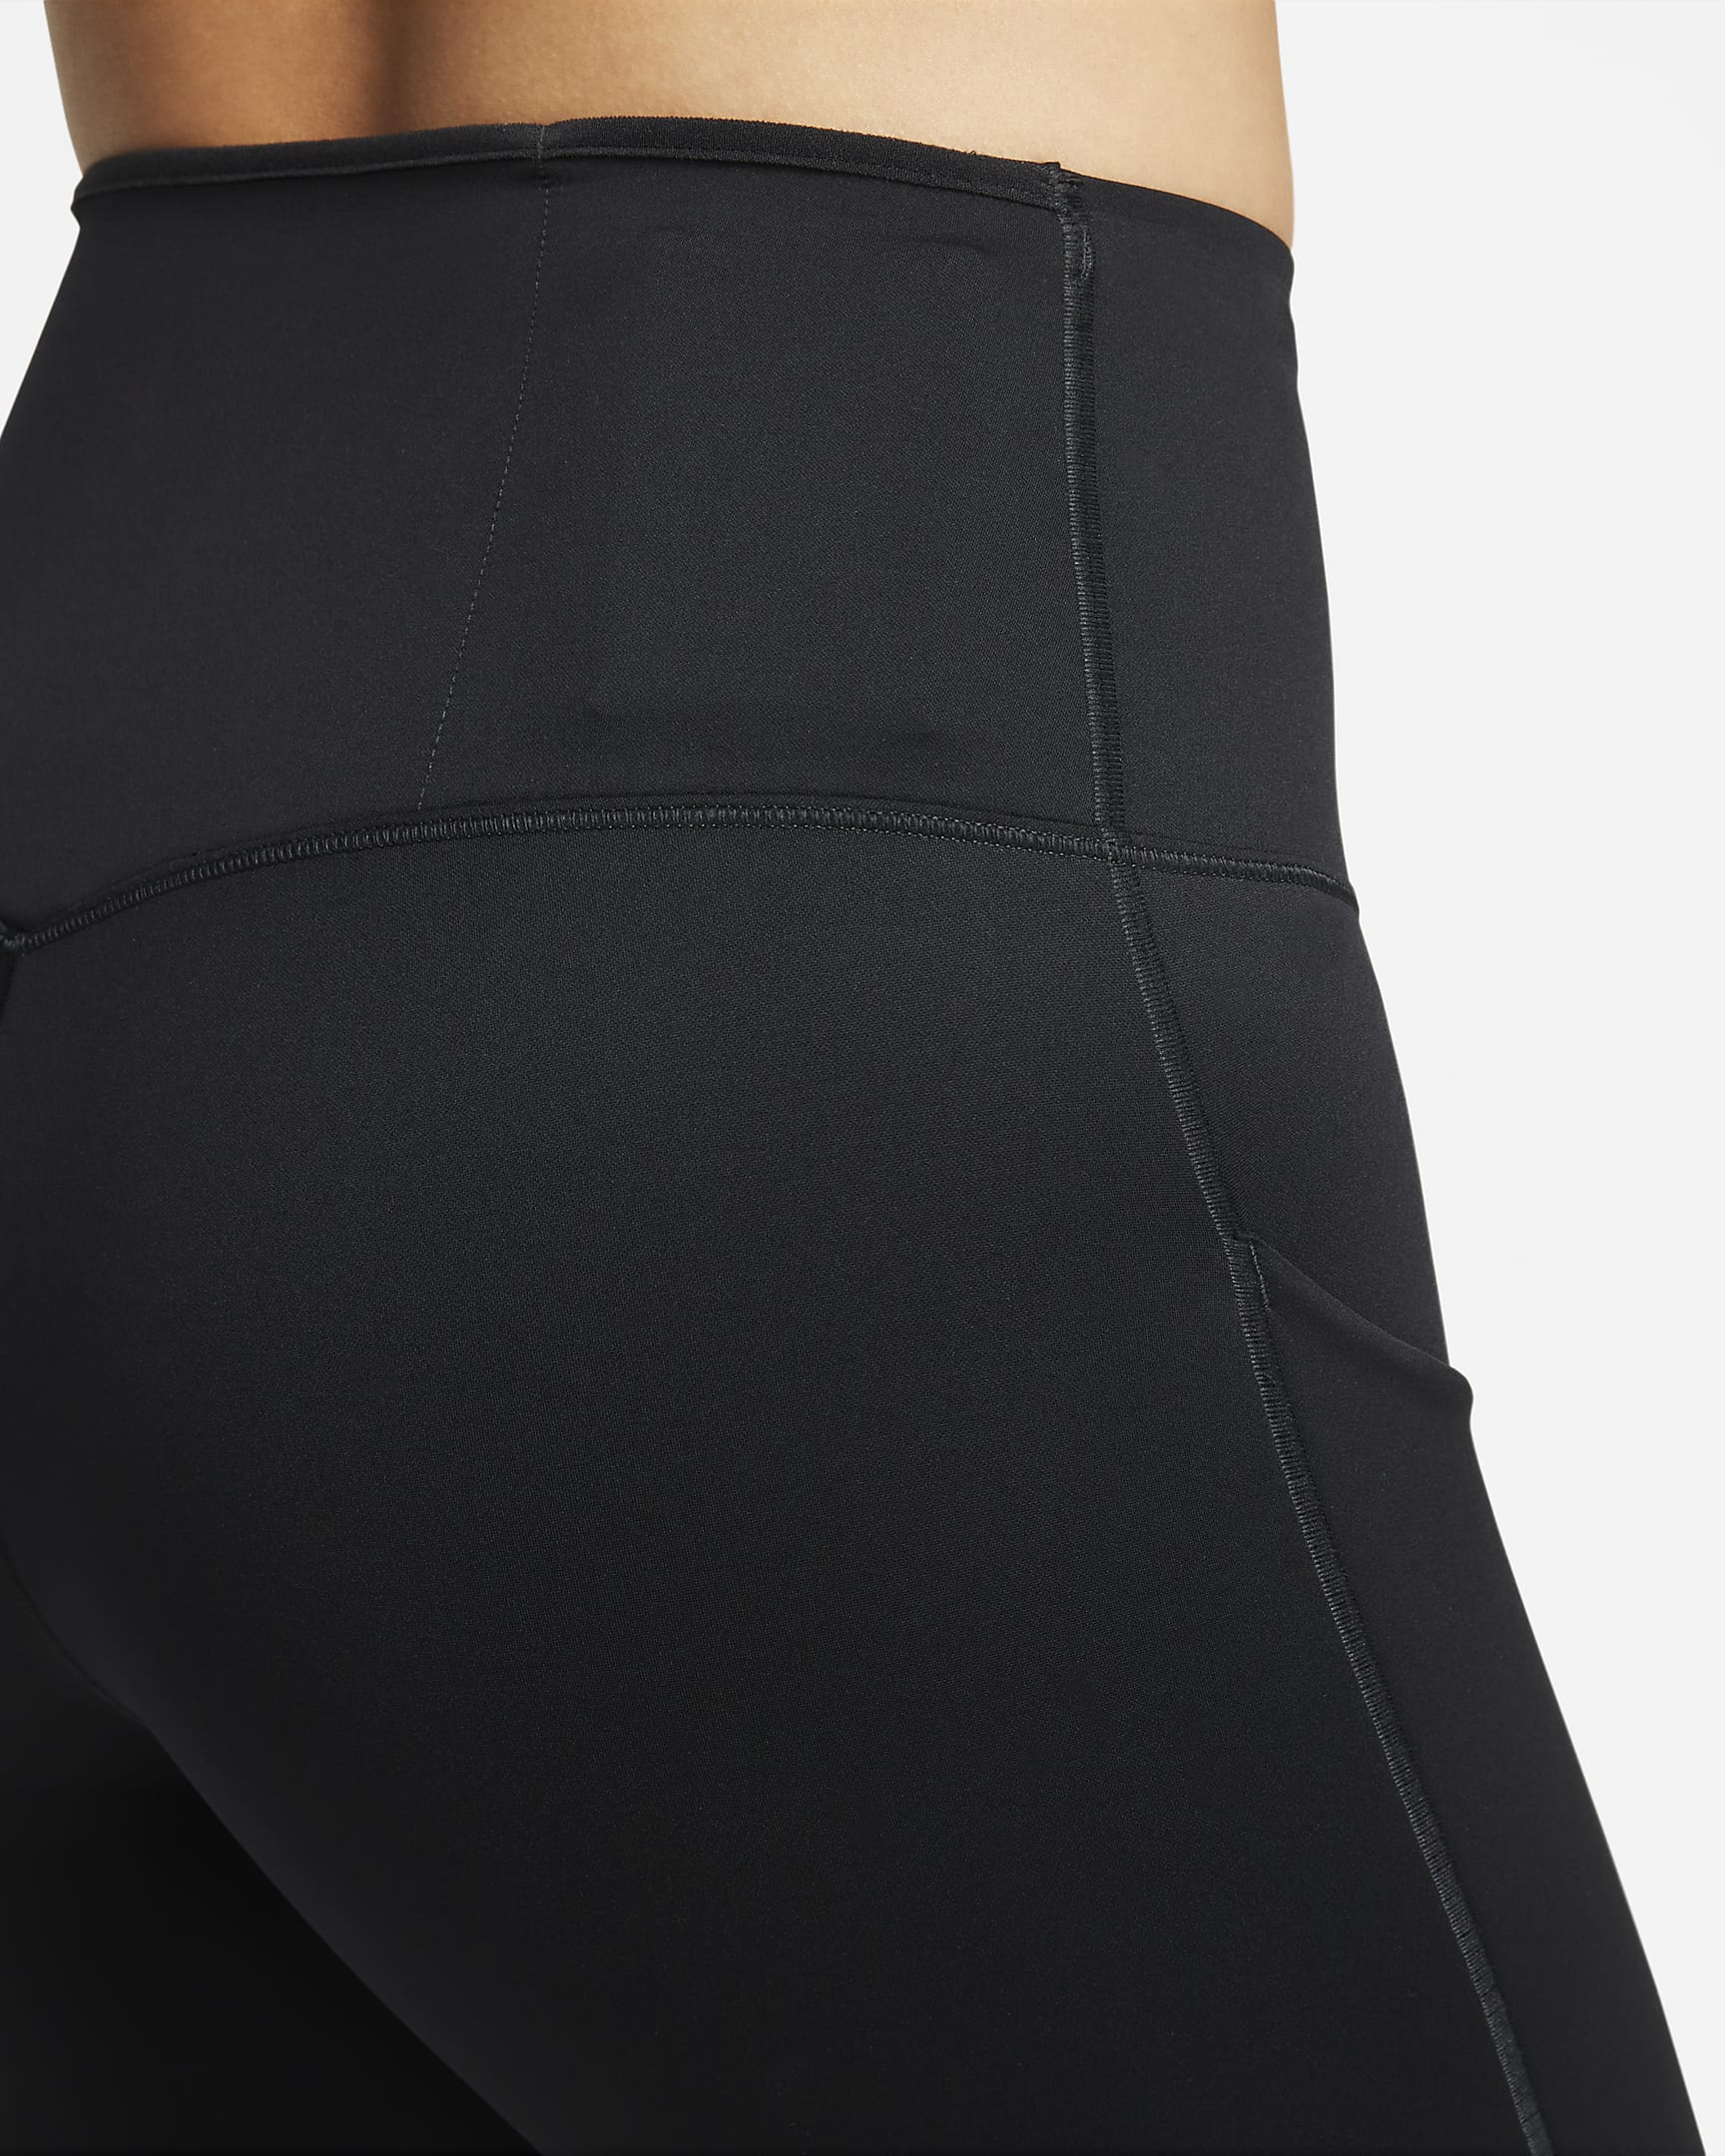 Nike Go Women's Firm-Support High-Waisted 7/8 Leggings with Pockets - Black/Black